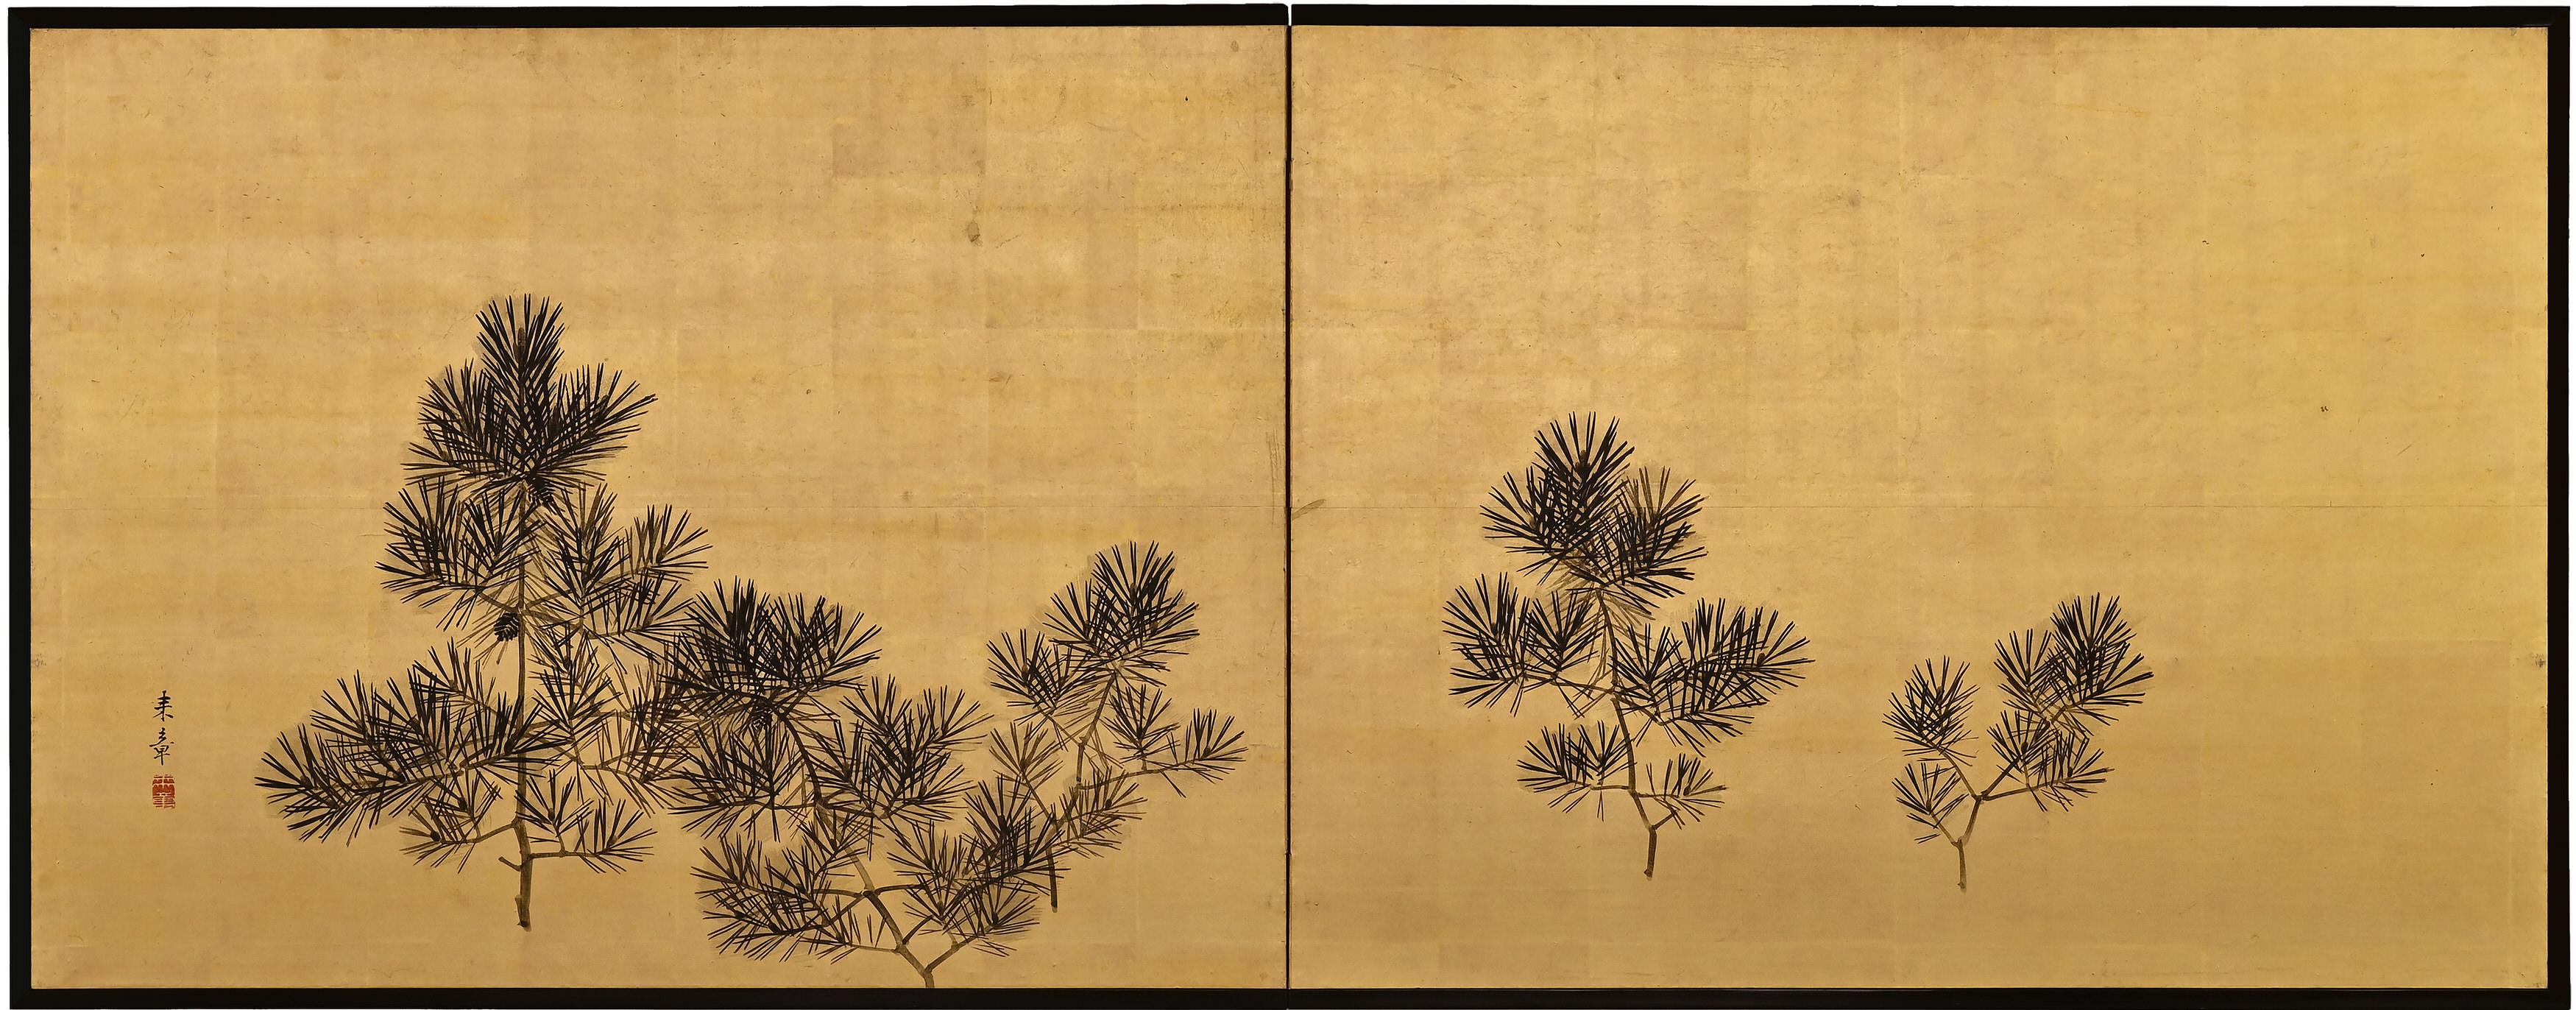 Three Friends of Winter

Nakajima Raisho (1796-1871)

Late Edo period, circa 1850

Ink and gold leaf on paper.

This is a double-sided Japanese Furosaki or tea-ceremony screen from the mid 19th century; bamboo and plum on the front, young